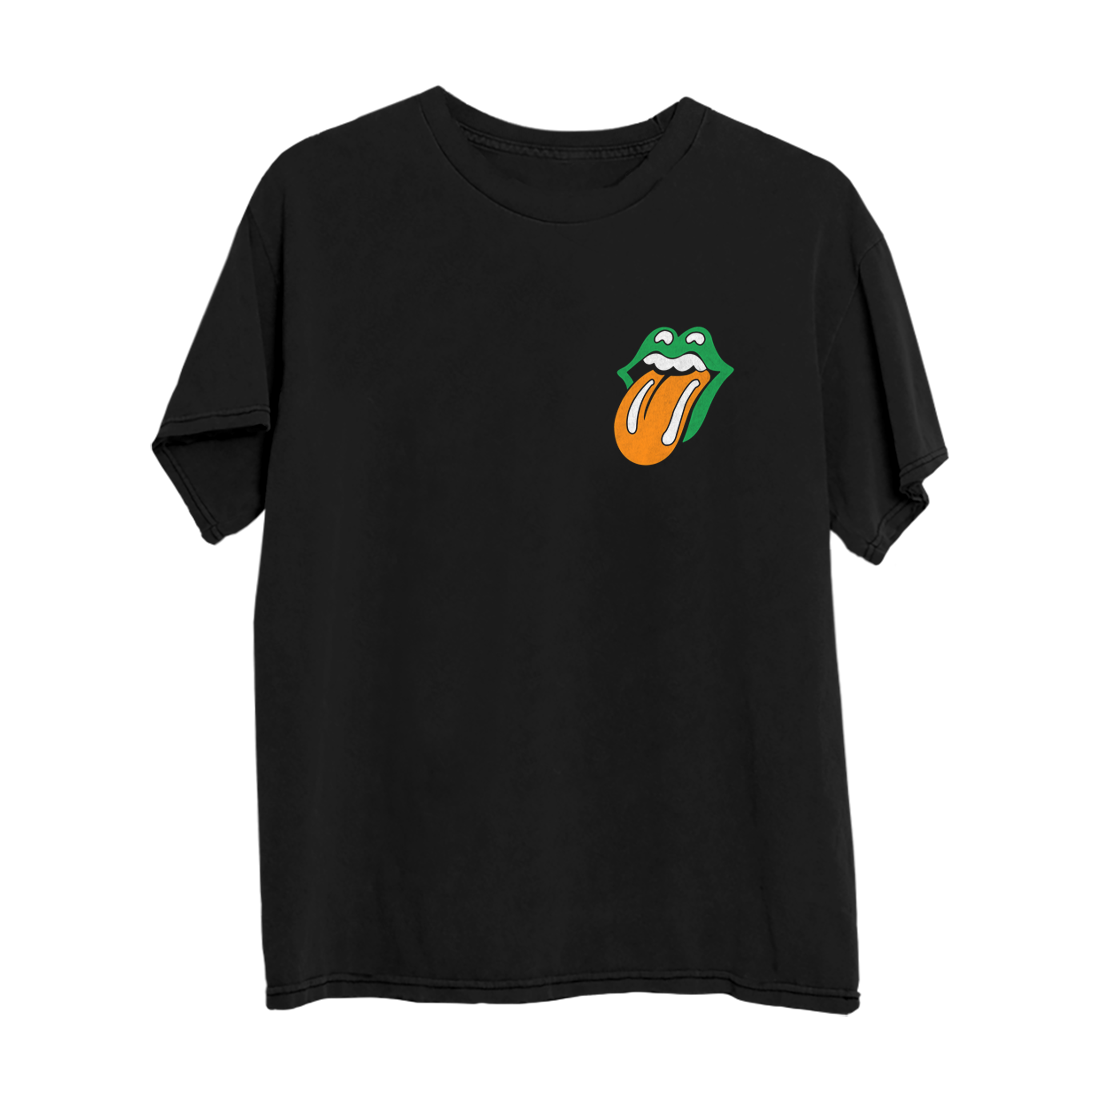 The Rolling Stones - Clover Tongue T-Shirt